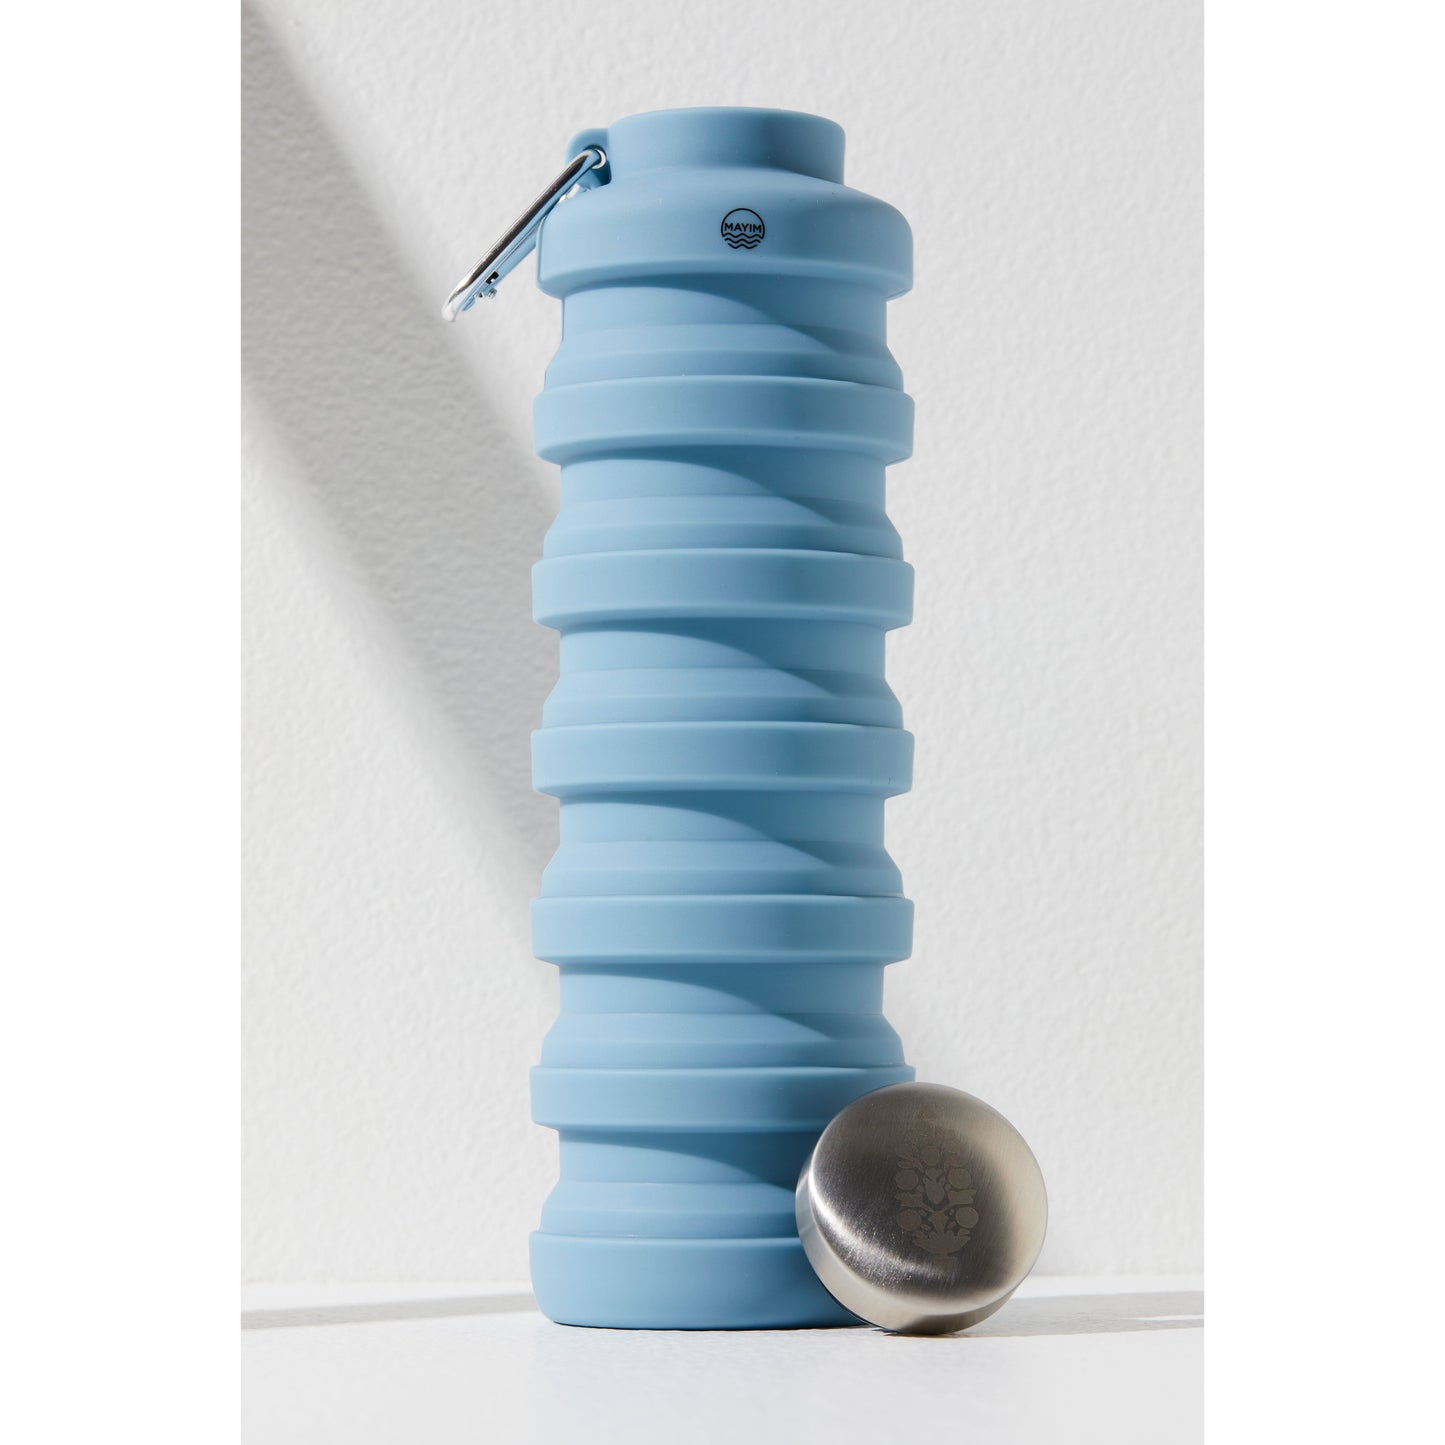 A collapsible, light blue silicone Free People Movement 24OZ Carabiner Bottle with its stainless steel lid placed next to it and a carabiner attached to its neck, designed as a tool for sustainable living.